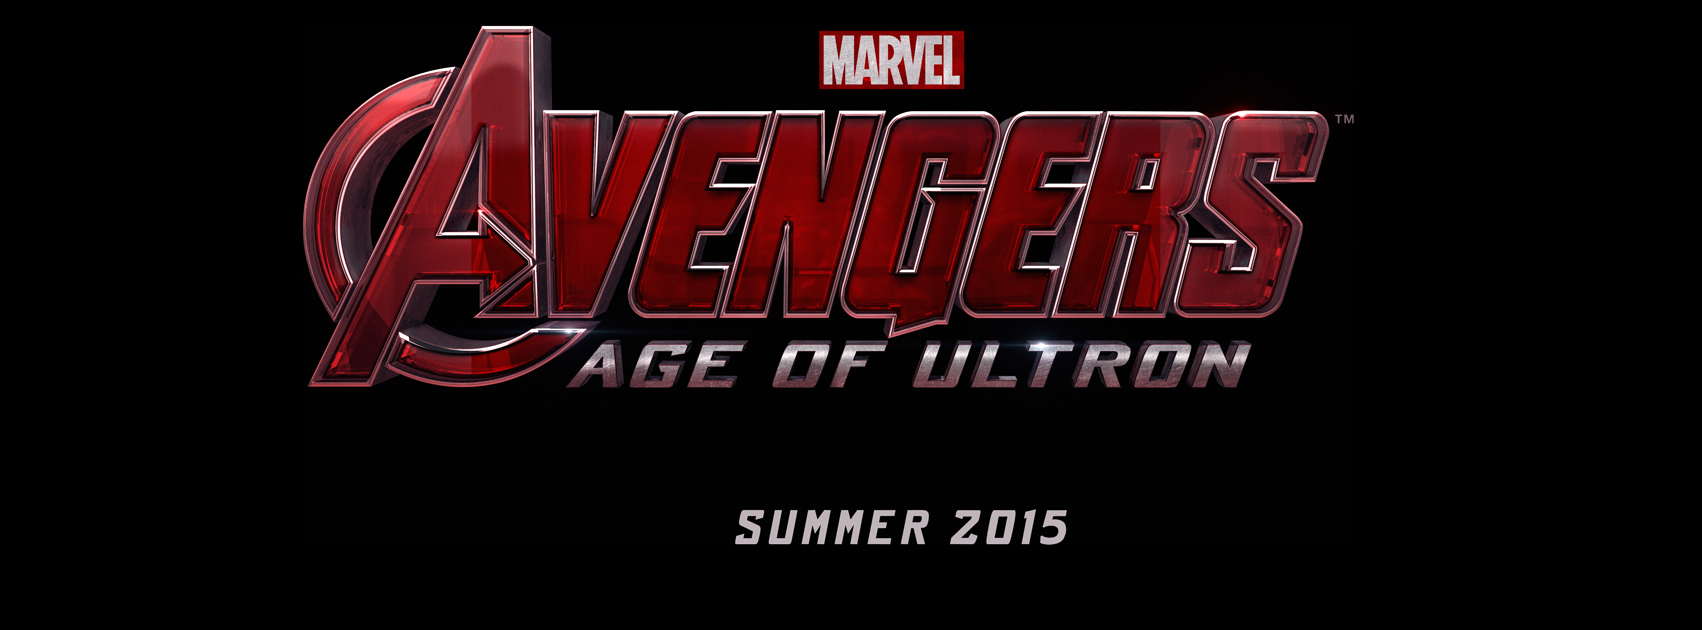 avengers age of ultron free streaming no sign up